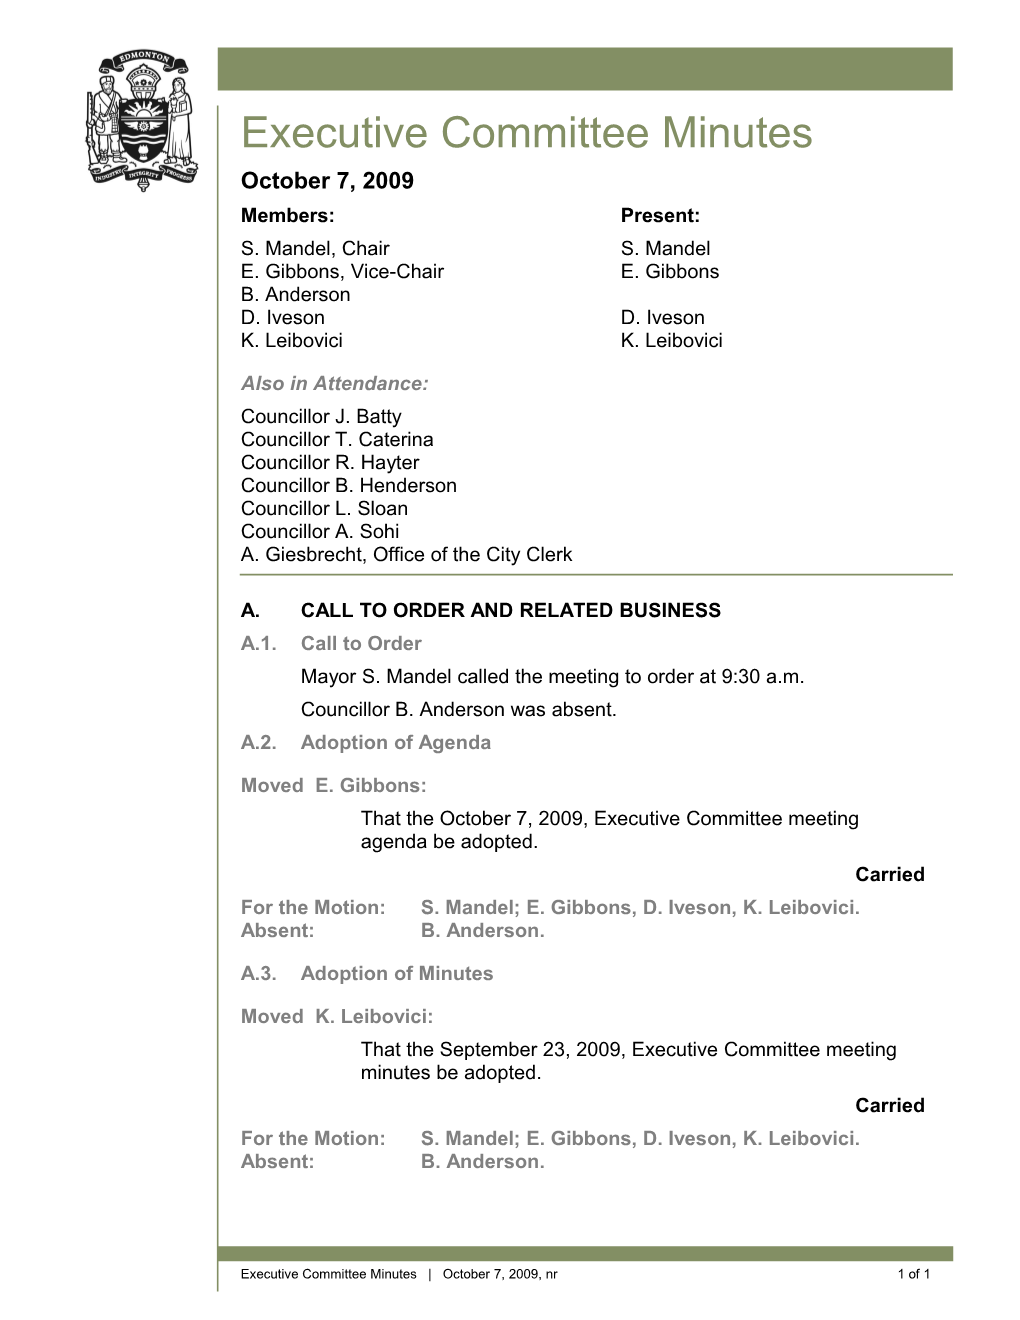 Minutes for Executive Committee October 7, 2009 Meeting